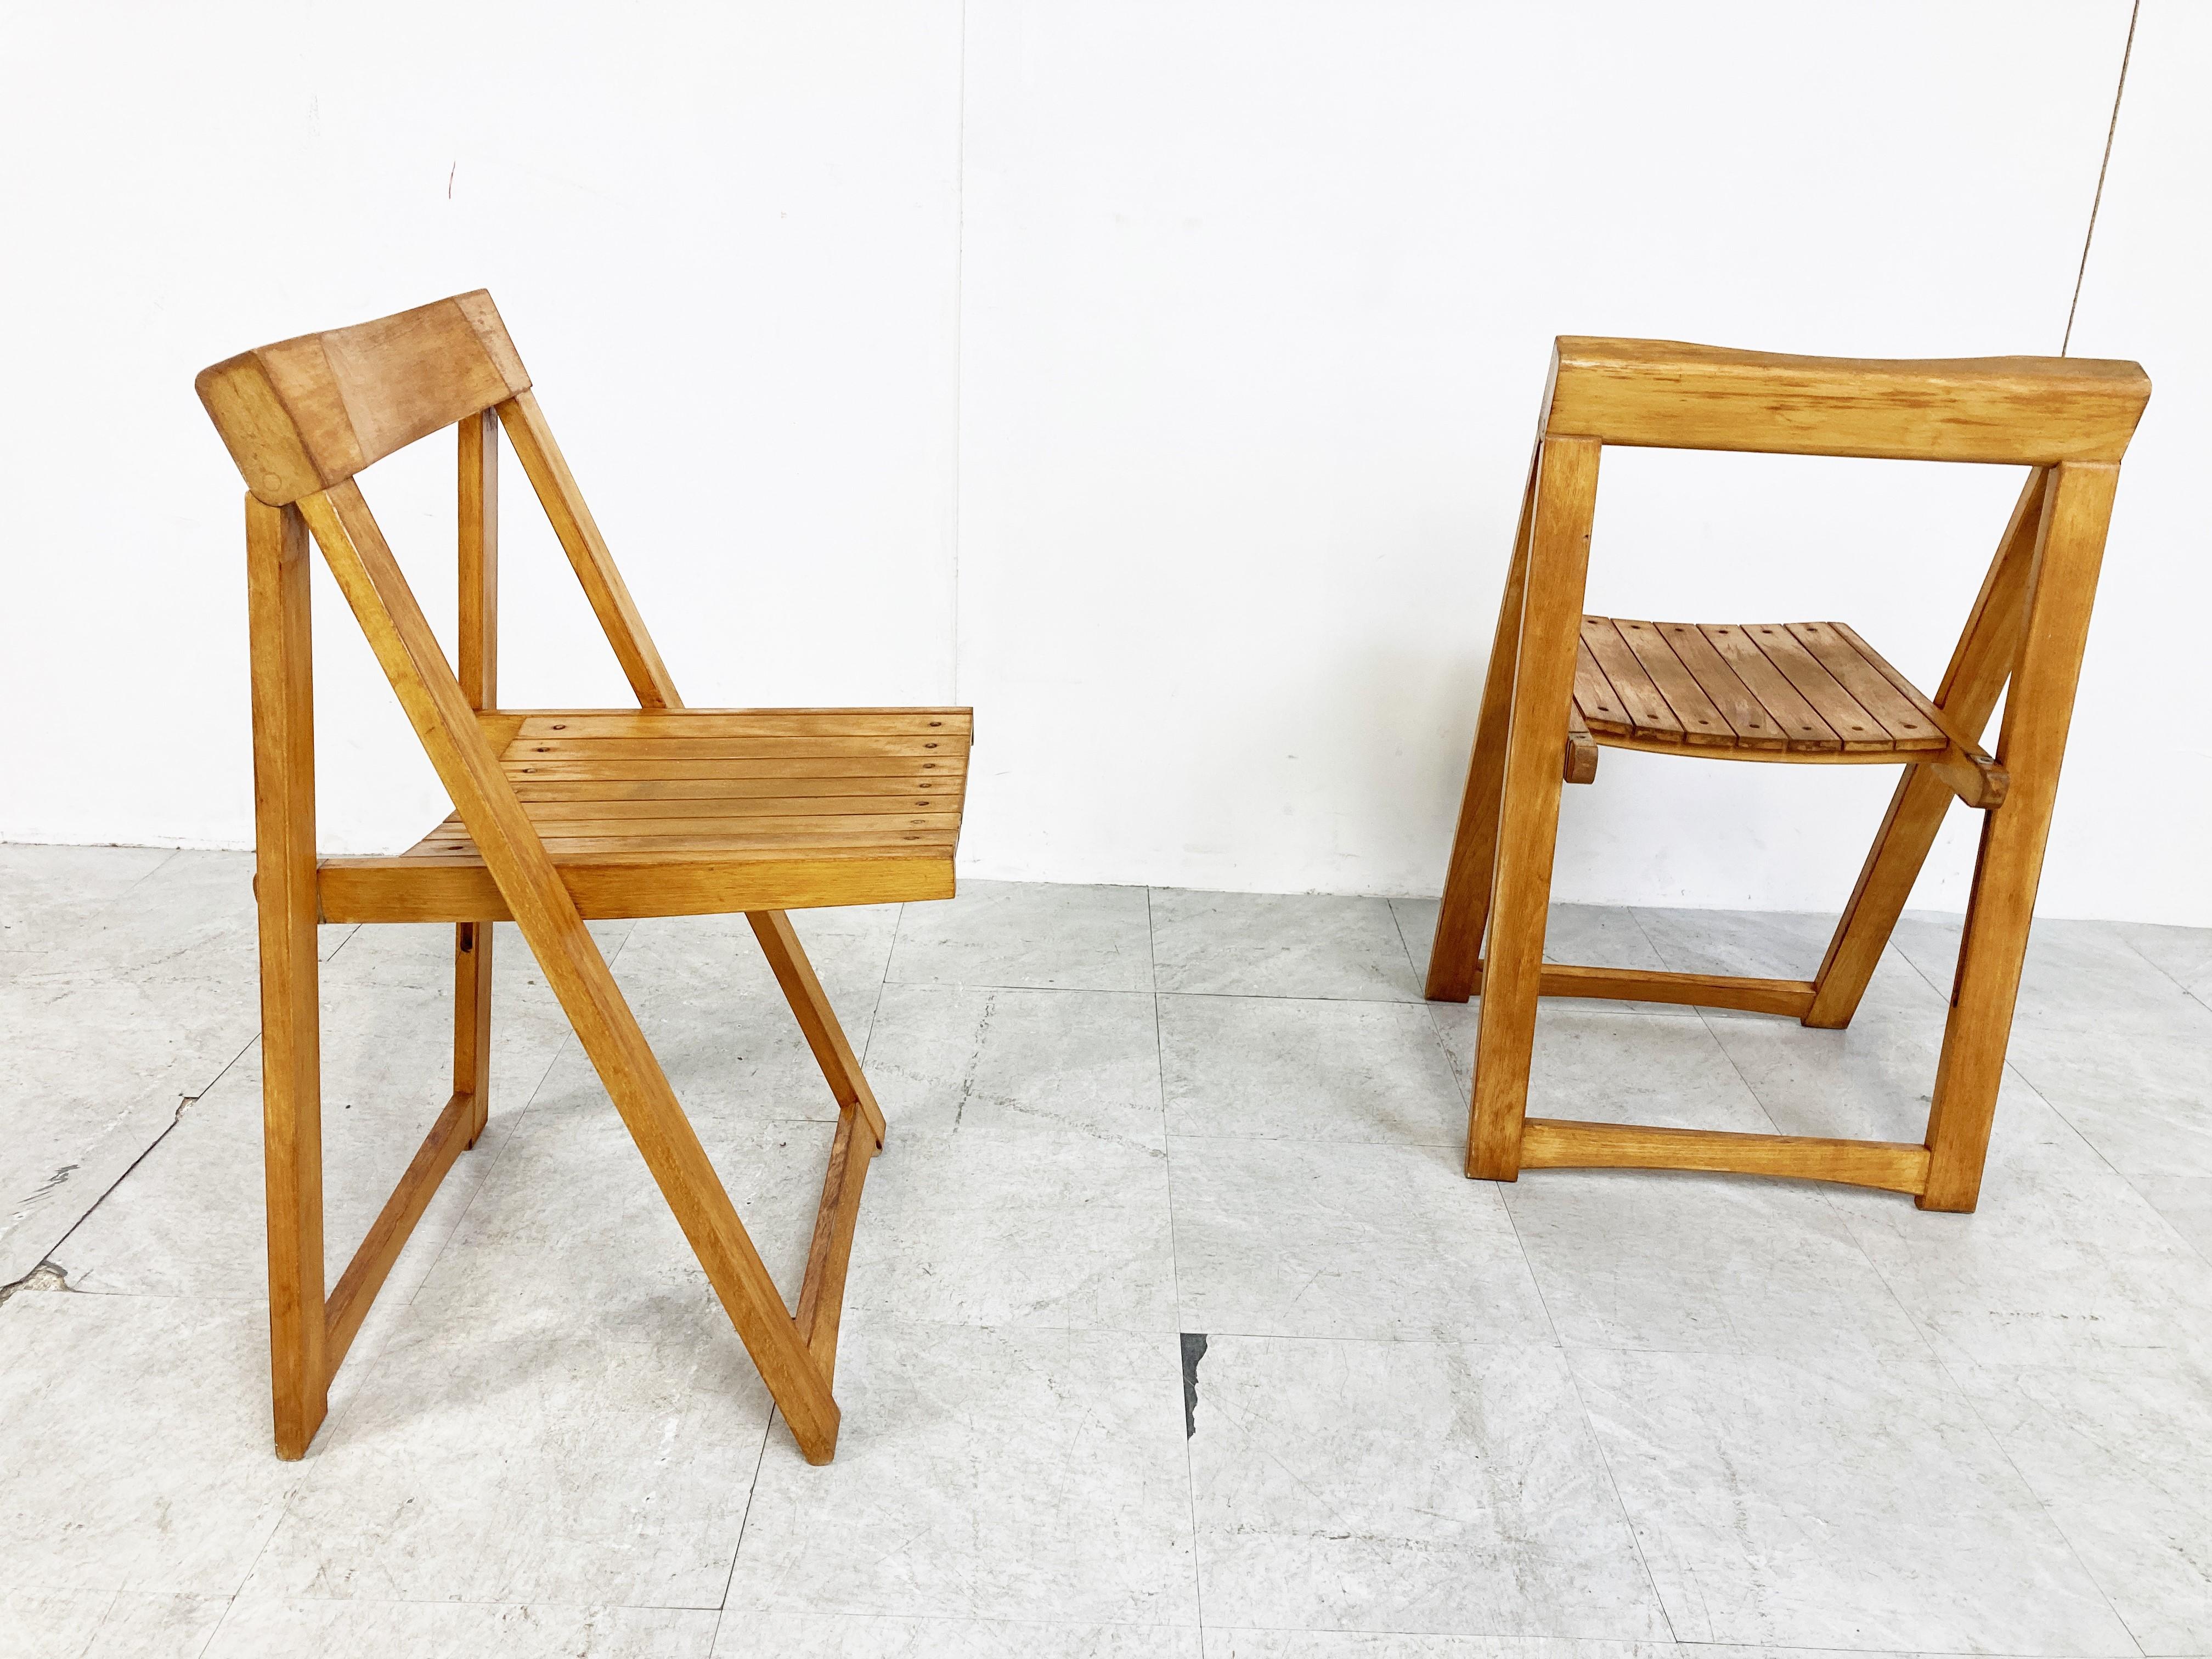 Vintage Wooden Folding Chairs, 1960s For Sale 3